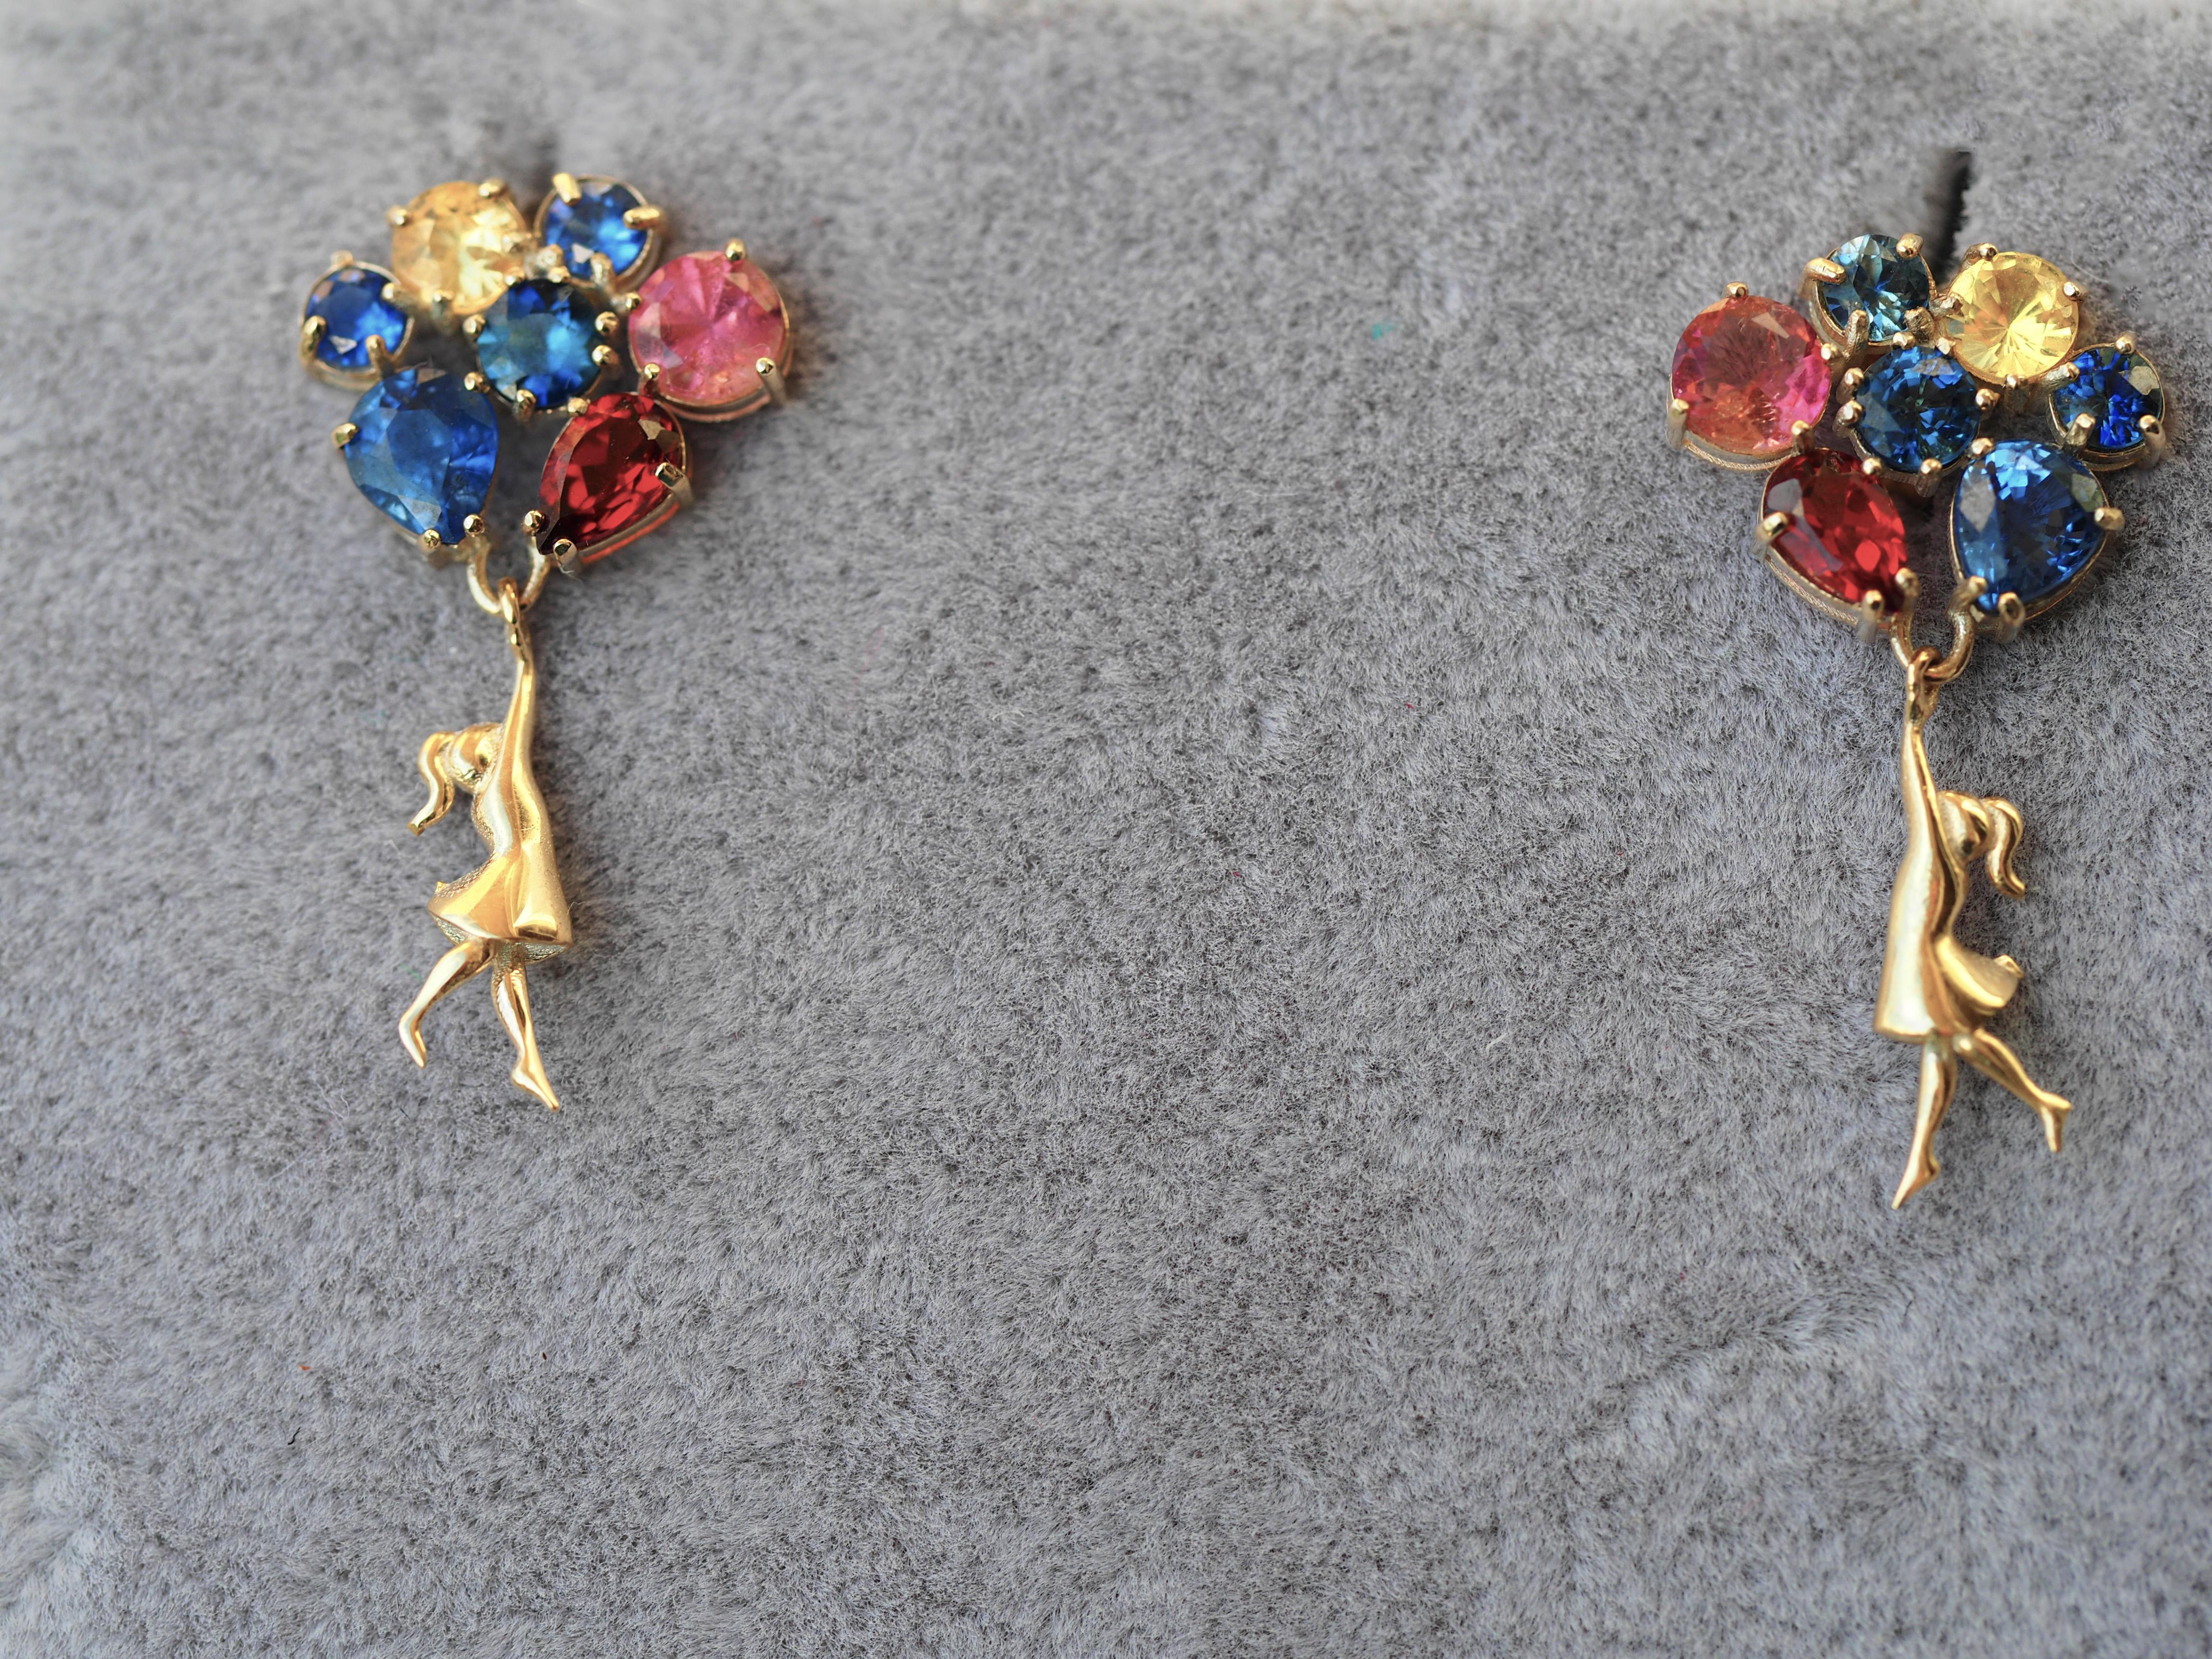 Banksy inspired Girl on balloons earrings with multicolor natural gemstones. Contemporary design earrings.
14k gold
Weight: 3.20 g.
Size: 25 х 7 mm.

Gemstones:
Blue sapphires: 2 pieces, 5 x 4 mm each - 1.20 ct total weight, blue violet color, pear